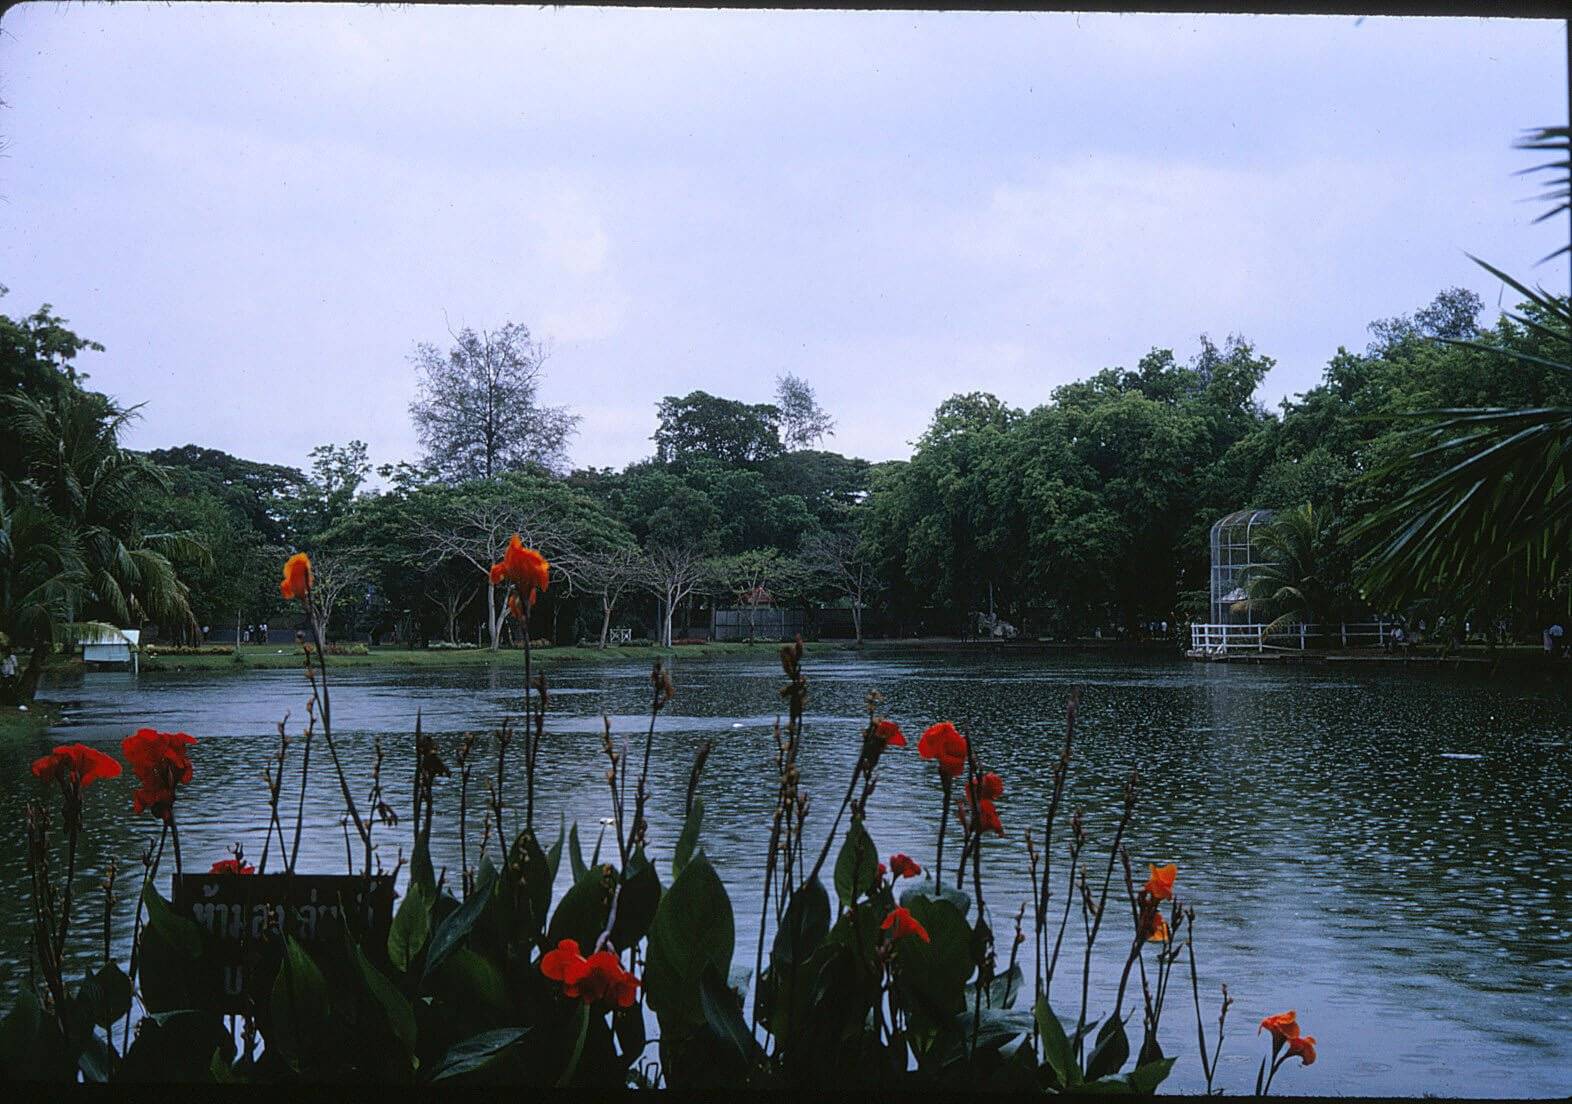 A landscape: orange tropical flowers in the foreground, a pond in the middle ground, and lush trees in the background.